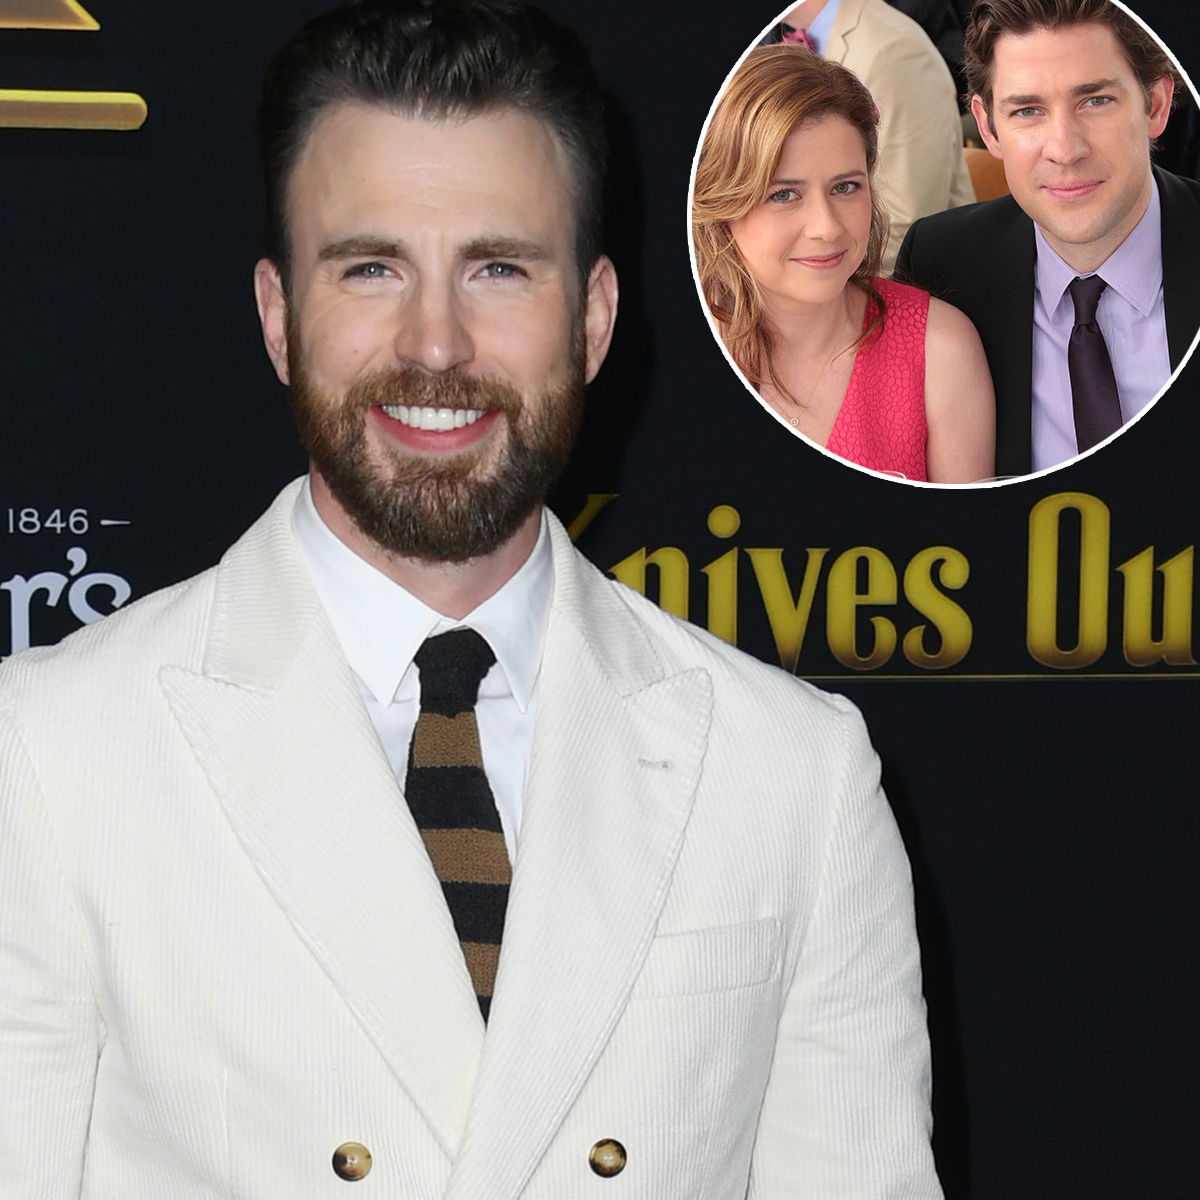 Chris Evans' Tweets About The Office Will Make You Swoon - E! Online